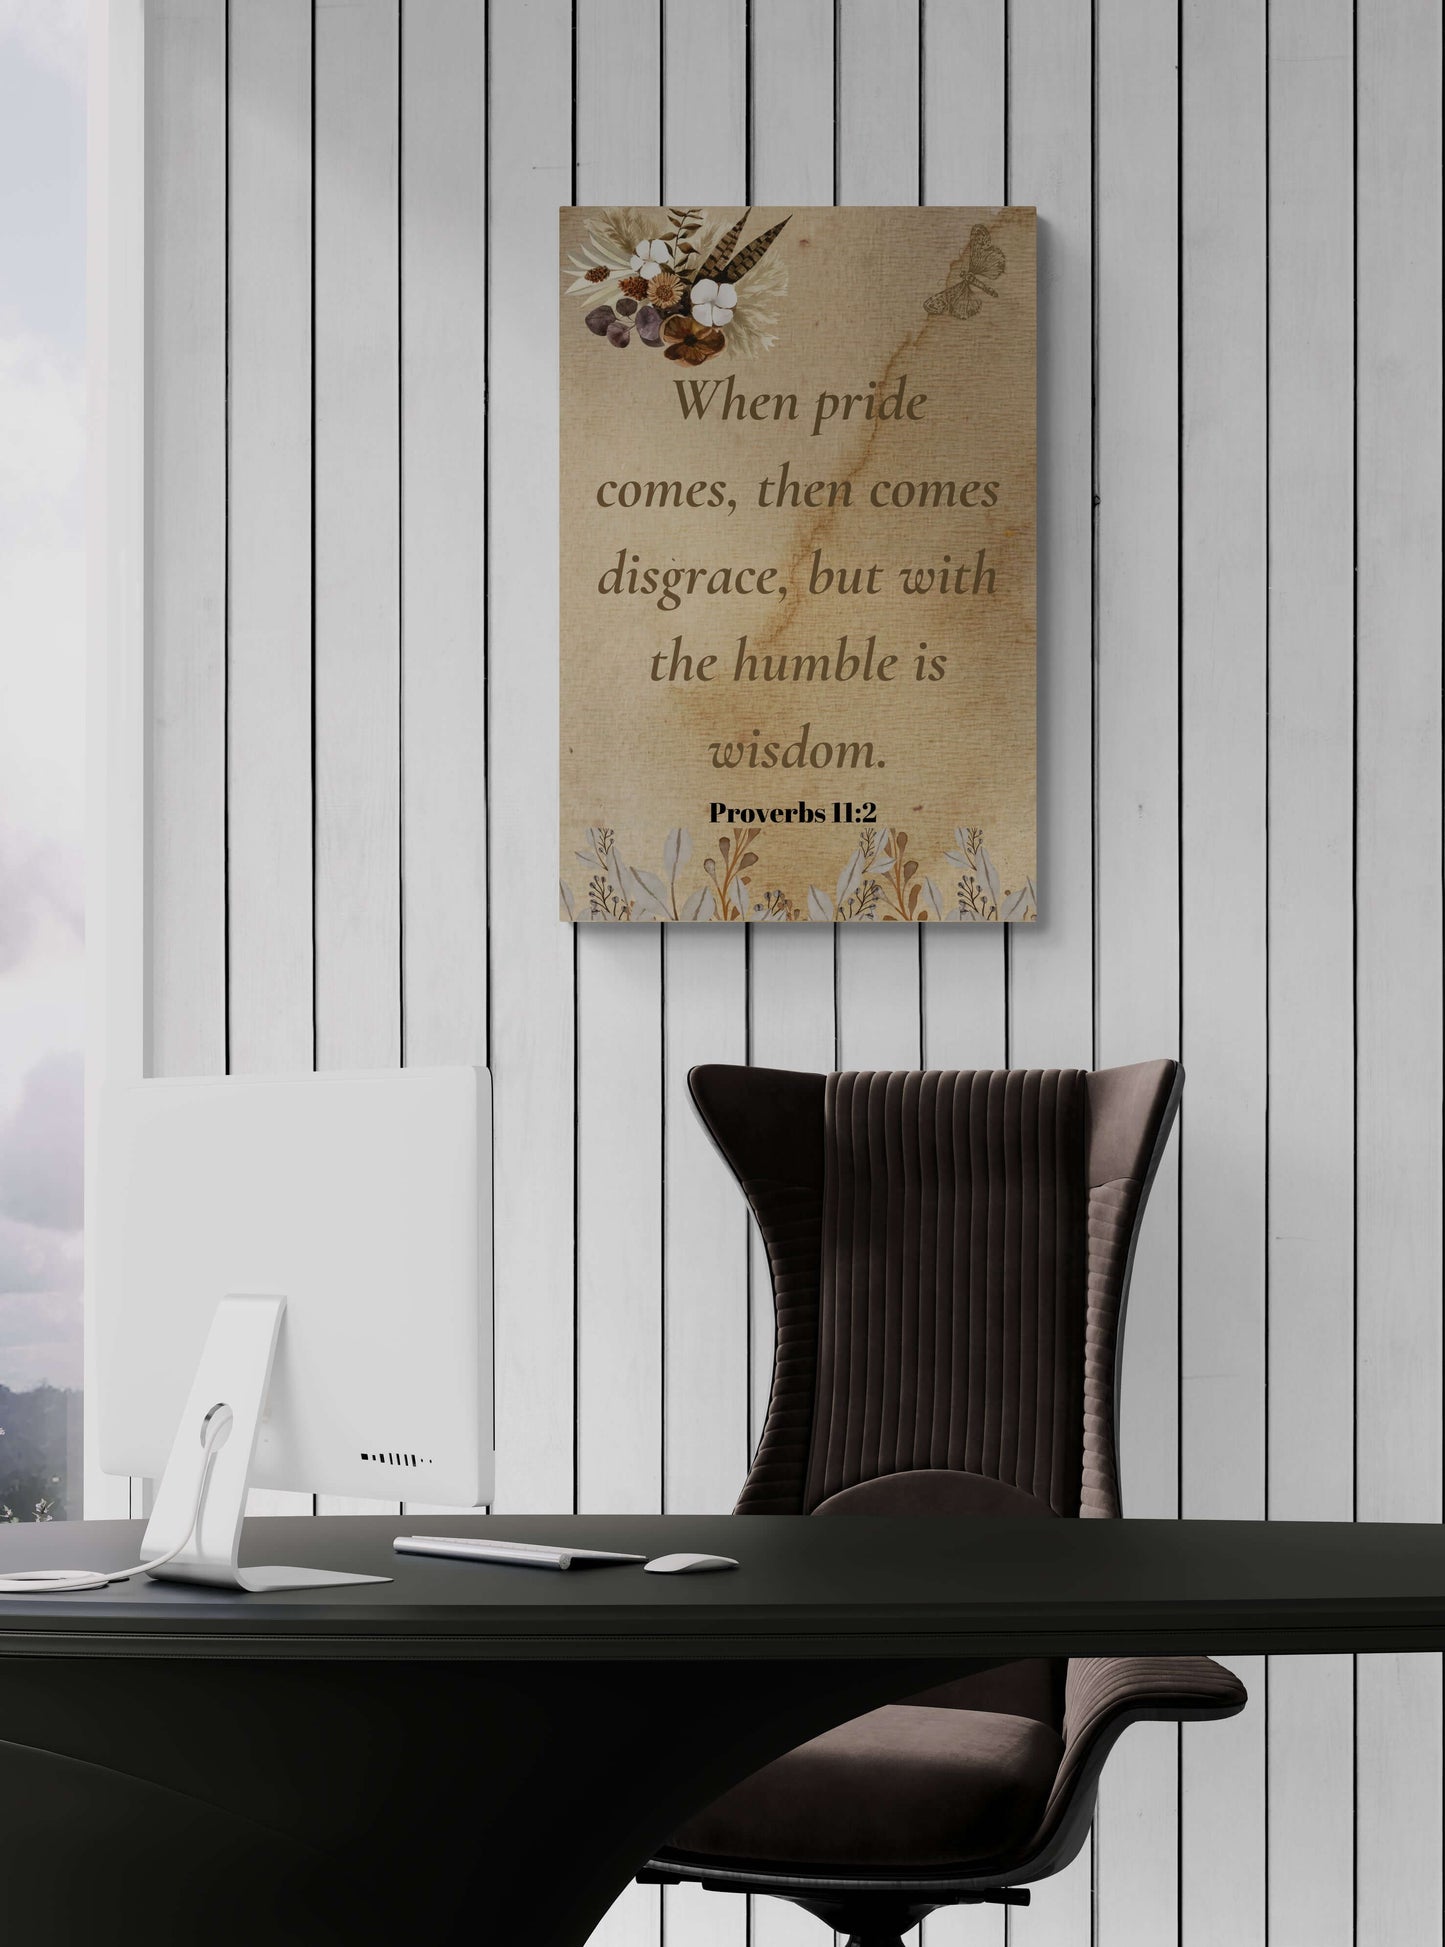 Vertical Wall Decorations: "Humility and Wisdom" Acrylic Wall Art | Art & Wall Decor,Assembled in the USA,Assembled in USA,Decor,Home & Living,Home Decor,Indoor,Made in the USA,Made in USA,Poster